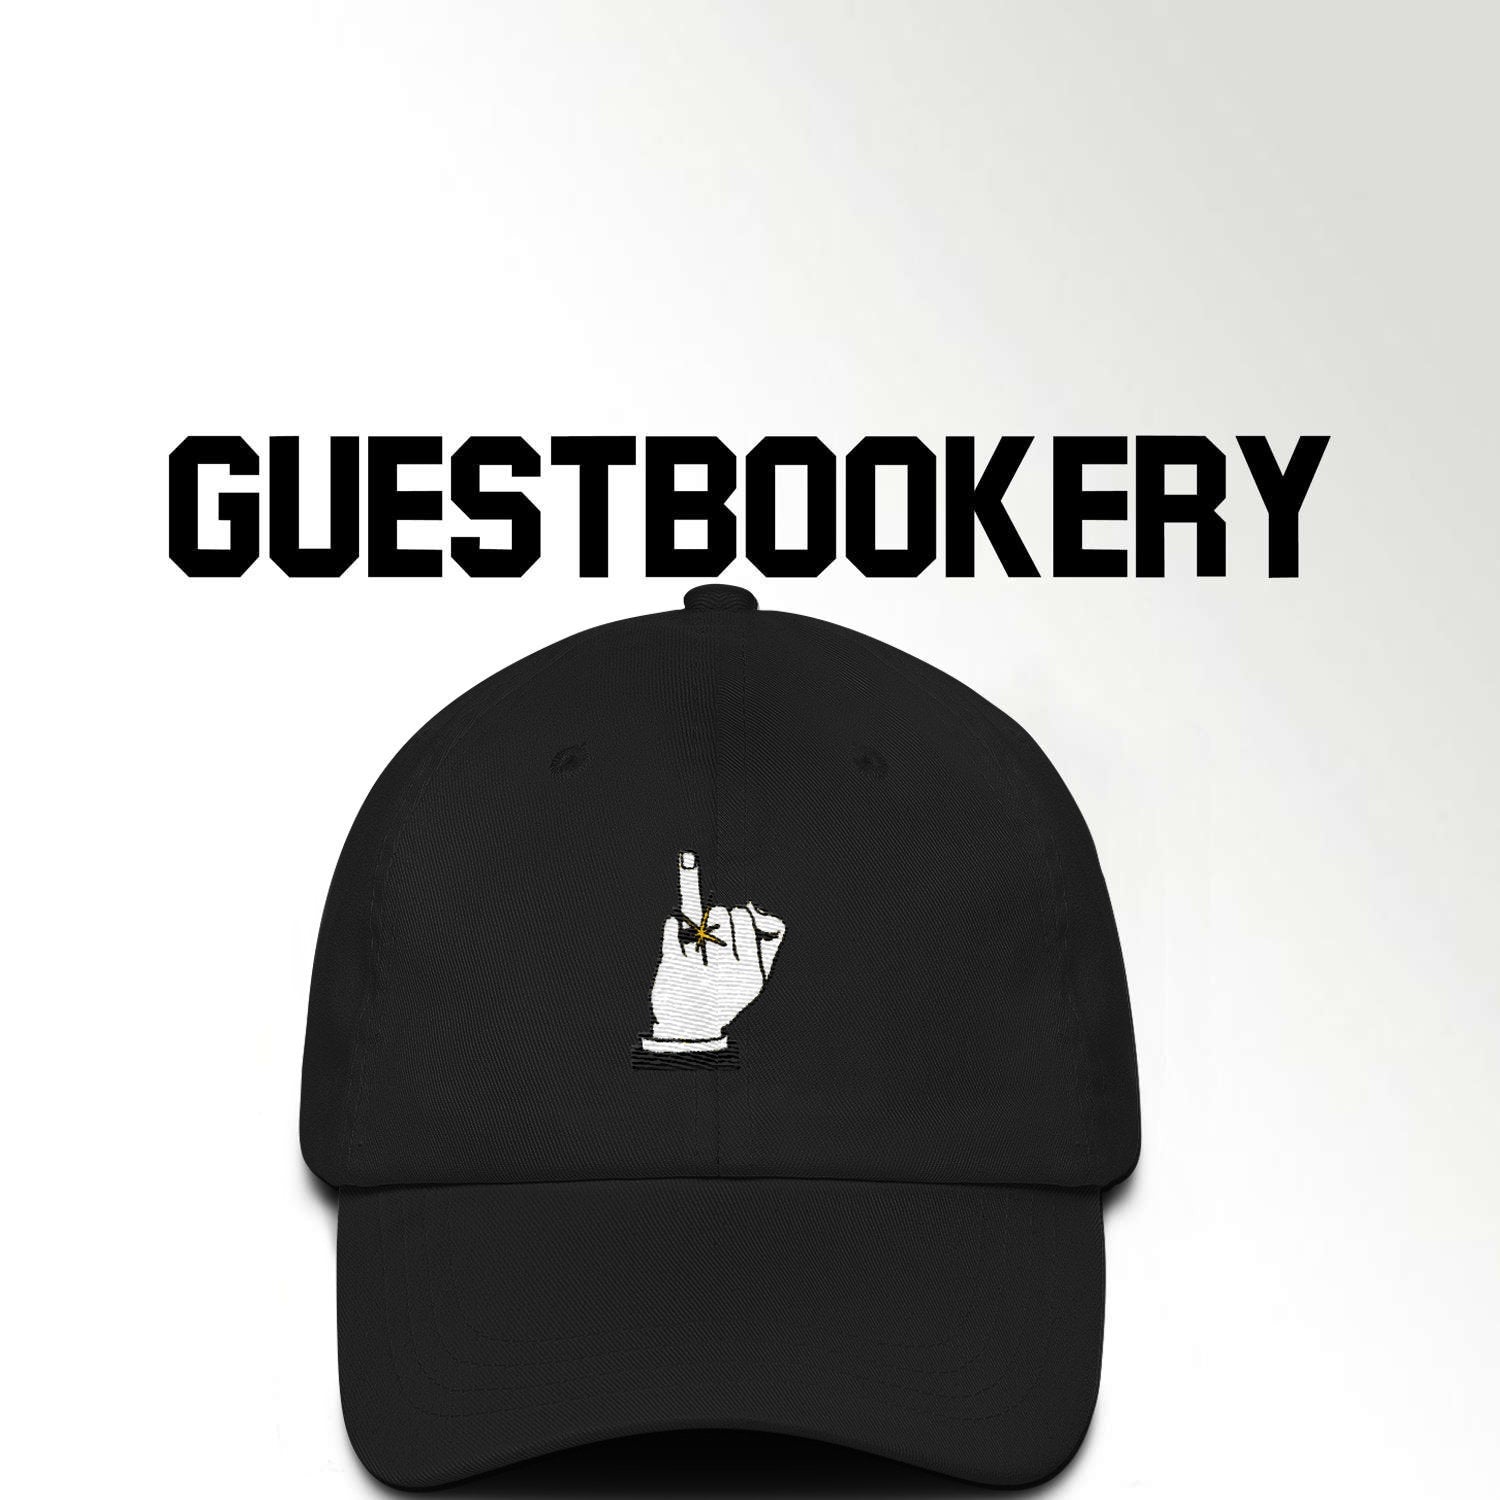 Ring Finger Hat - Groom - Guestbookery